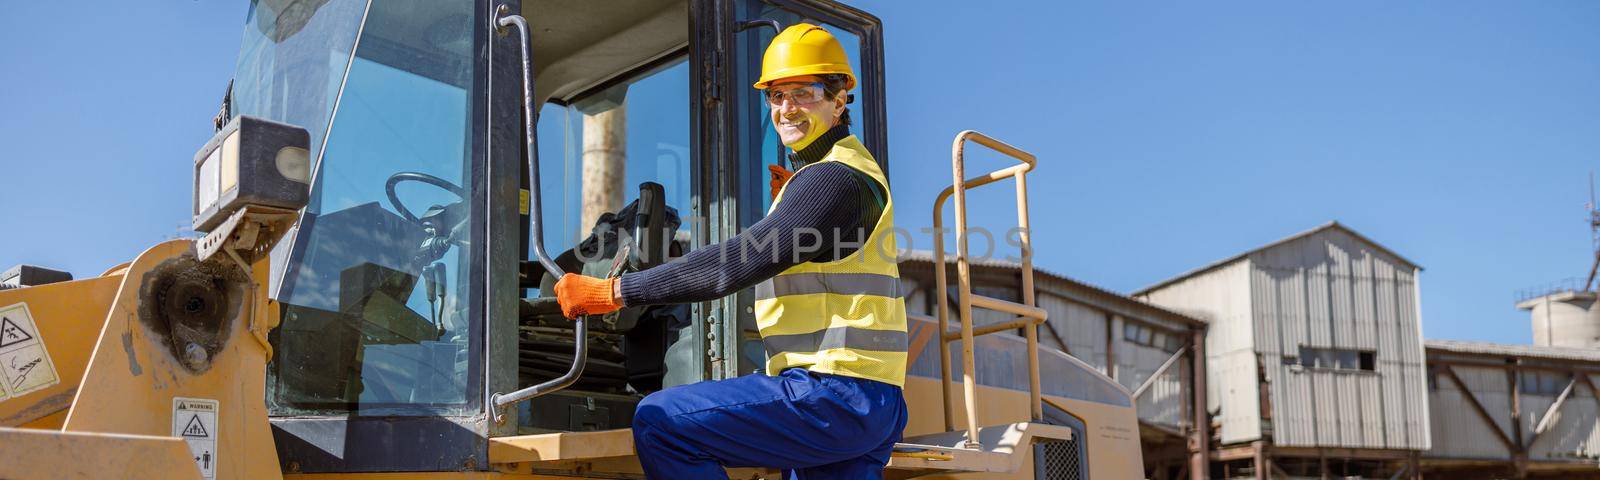 Cheerful male engineer standing on tractor stairs outdoors by Yaroslav_astakhov